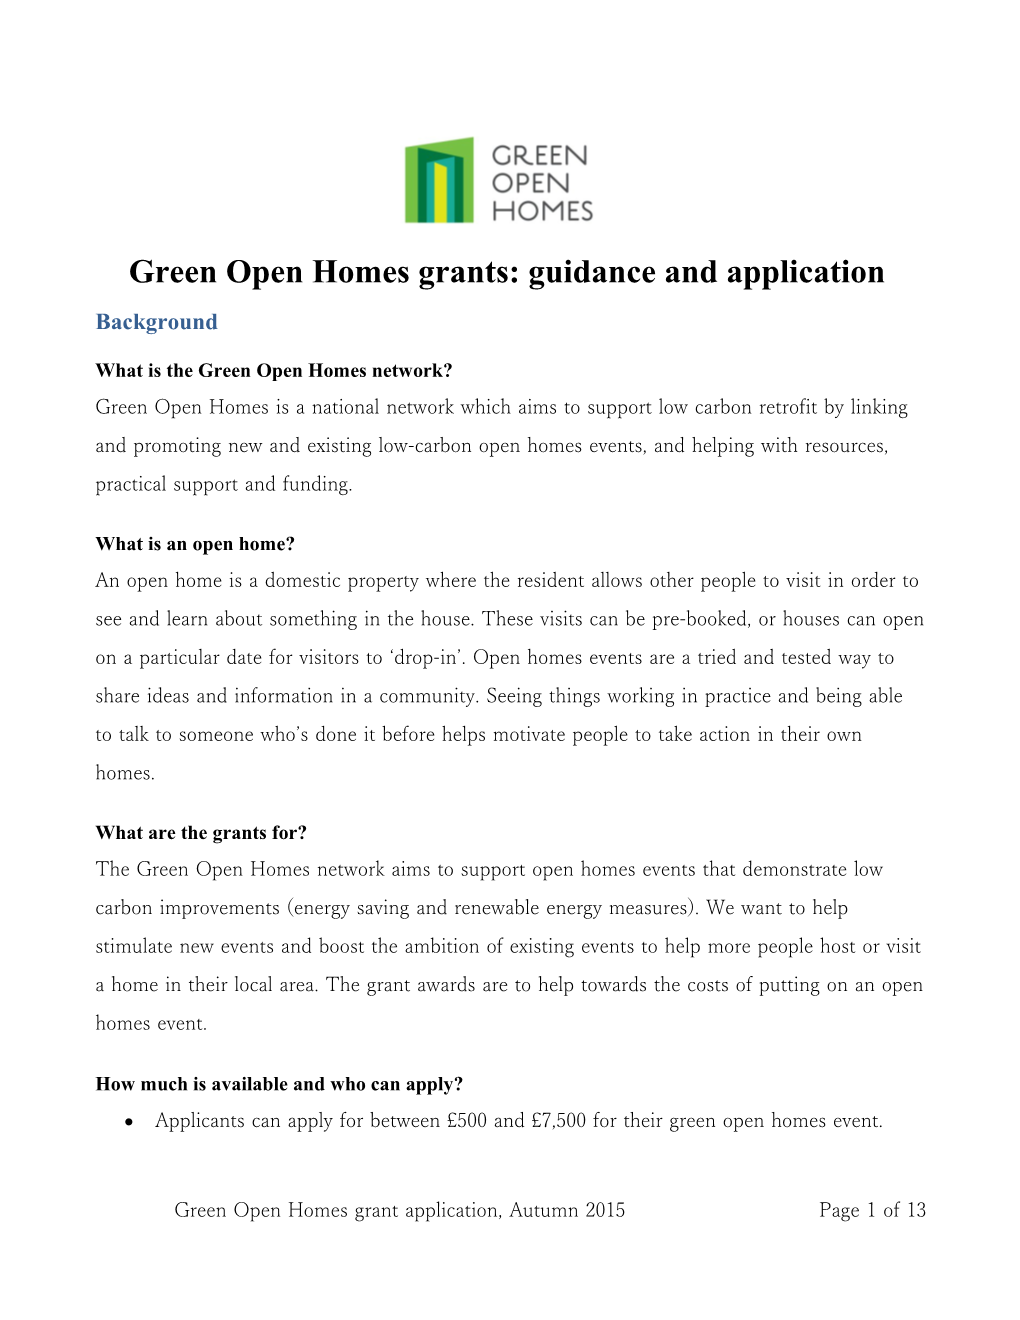 Green Open Homes Grants: Guidance and Application